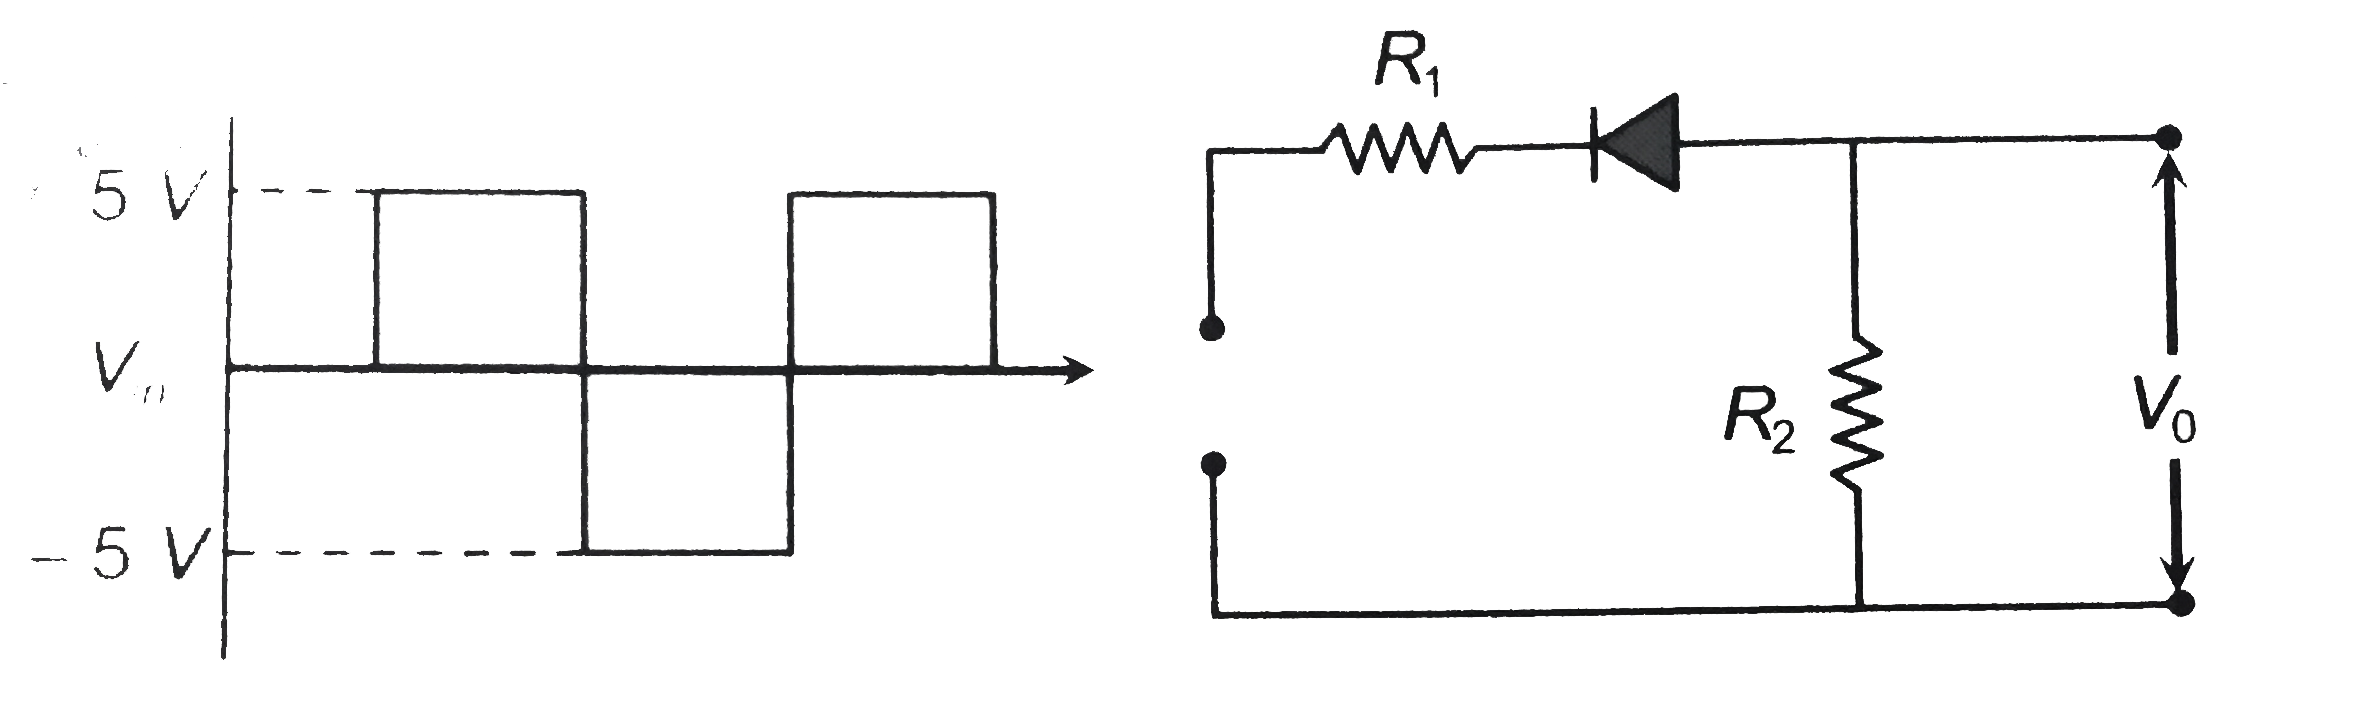 A waveform shown when applied to the following circuit will produce which of the following output waveform? [Assuming ideal diode configuration and R(1)=R(2)]